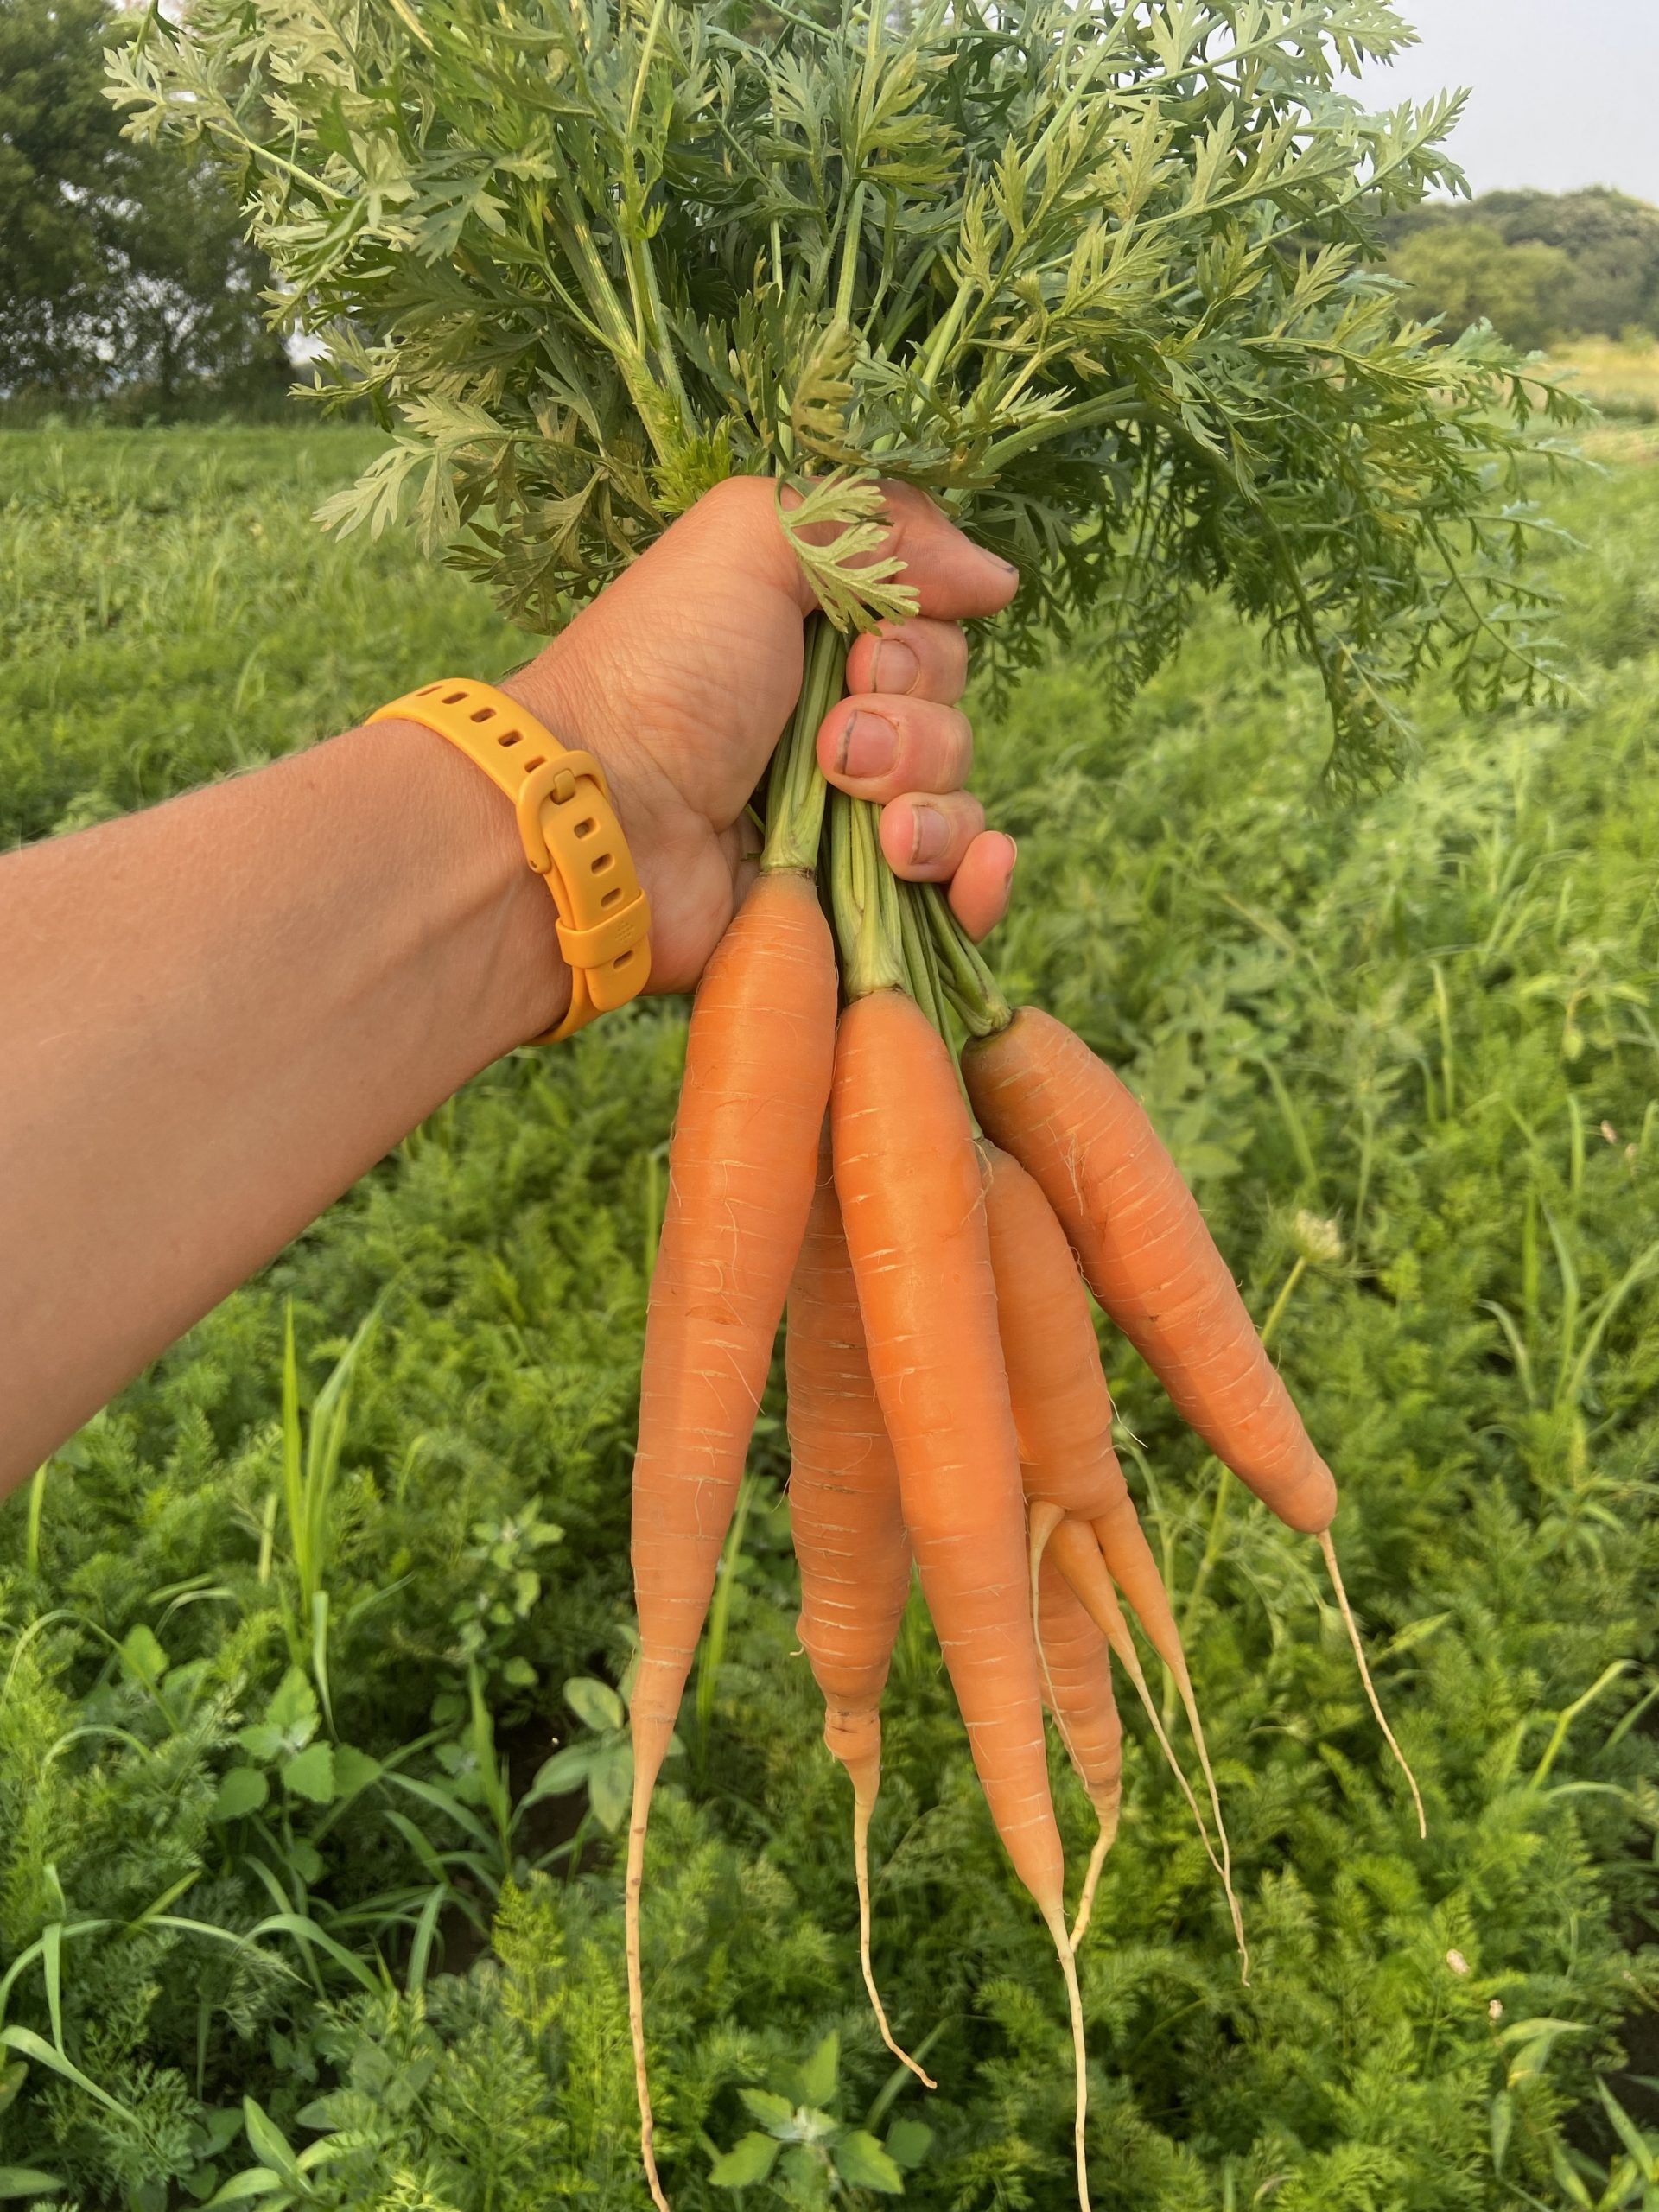 Meijer selling organic mini carrots in new compostable bags | Business |  abc12.com